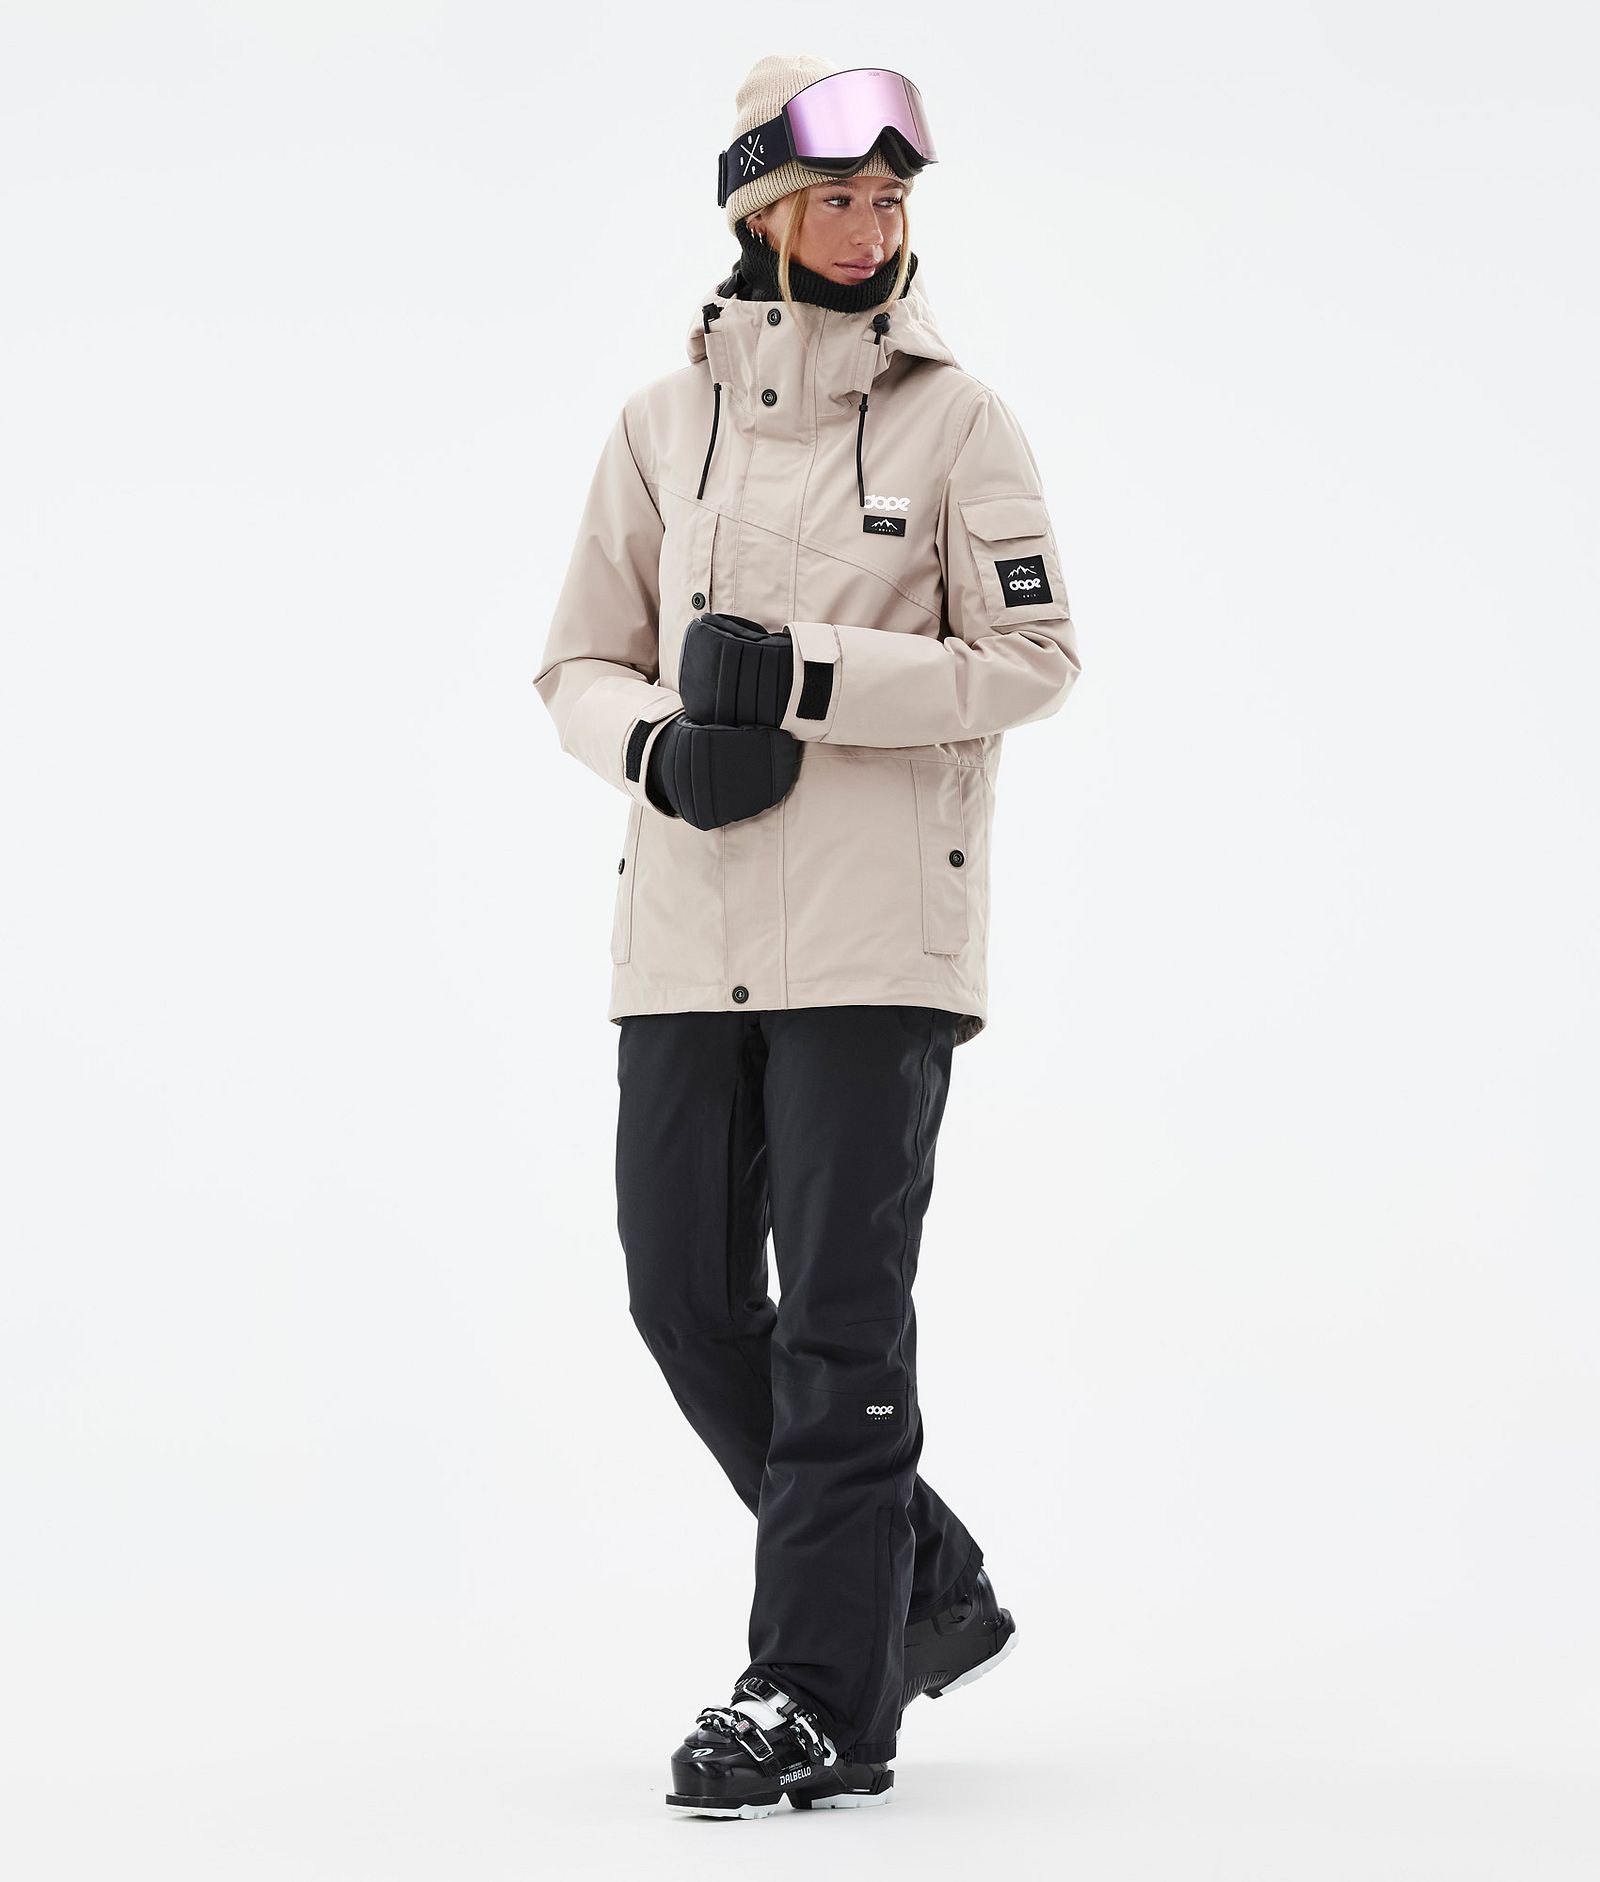 Dope Adept W Ski Outfit Women Sand/Black